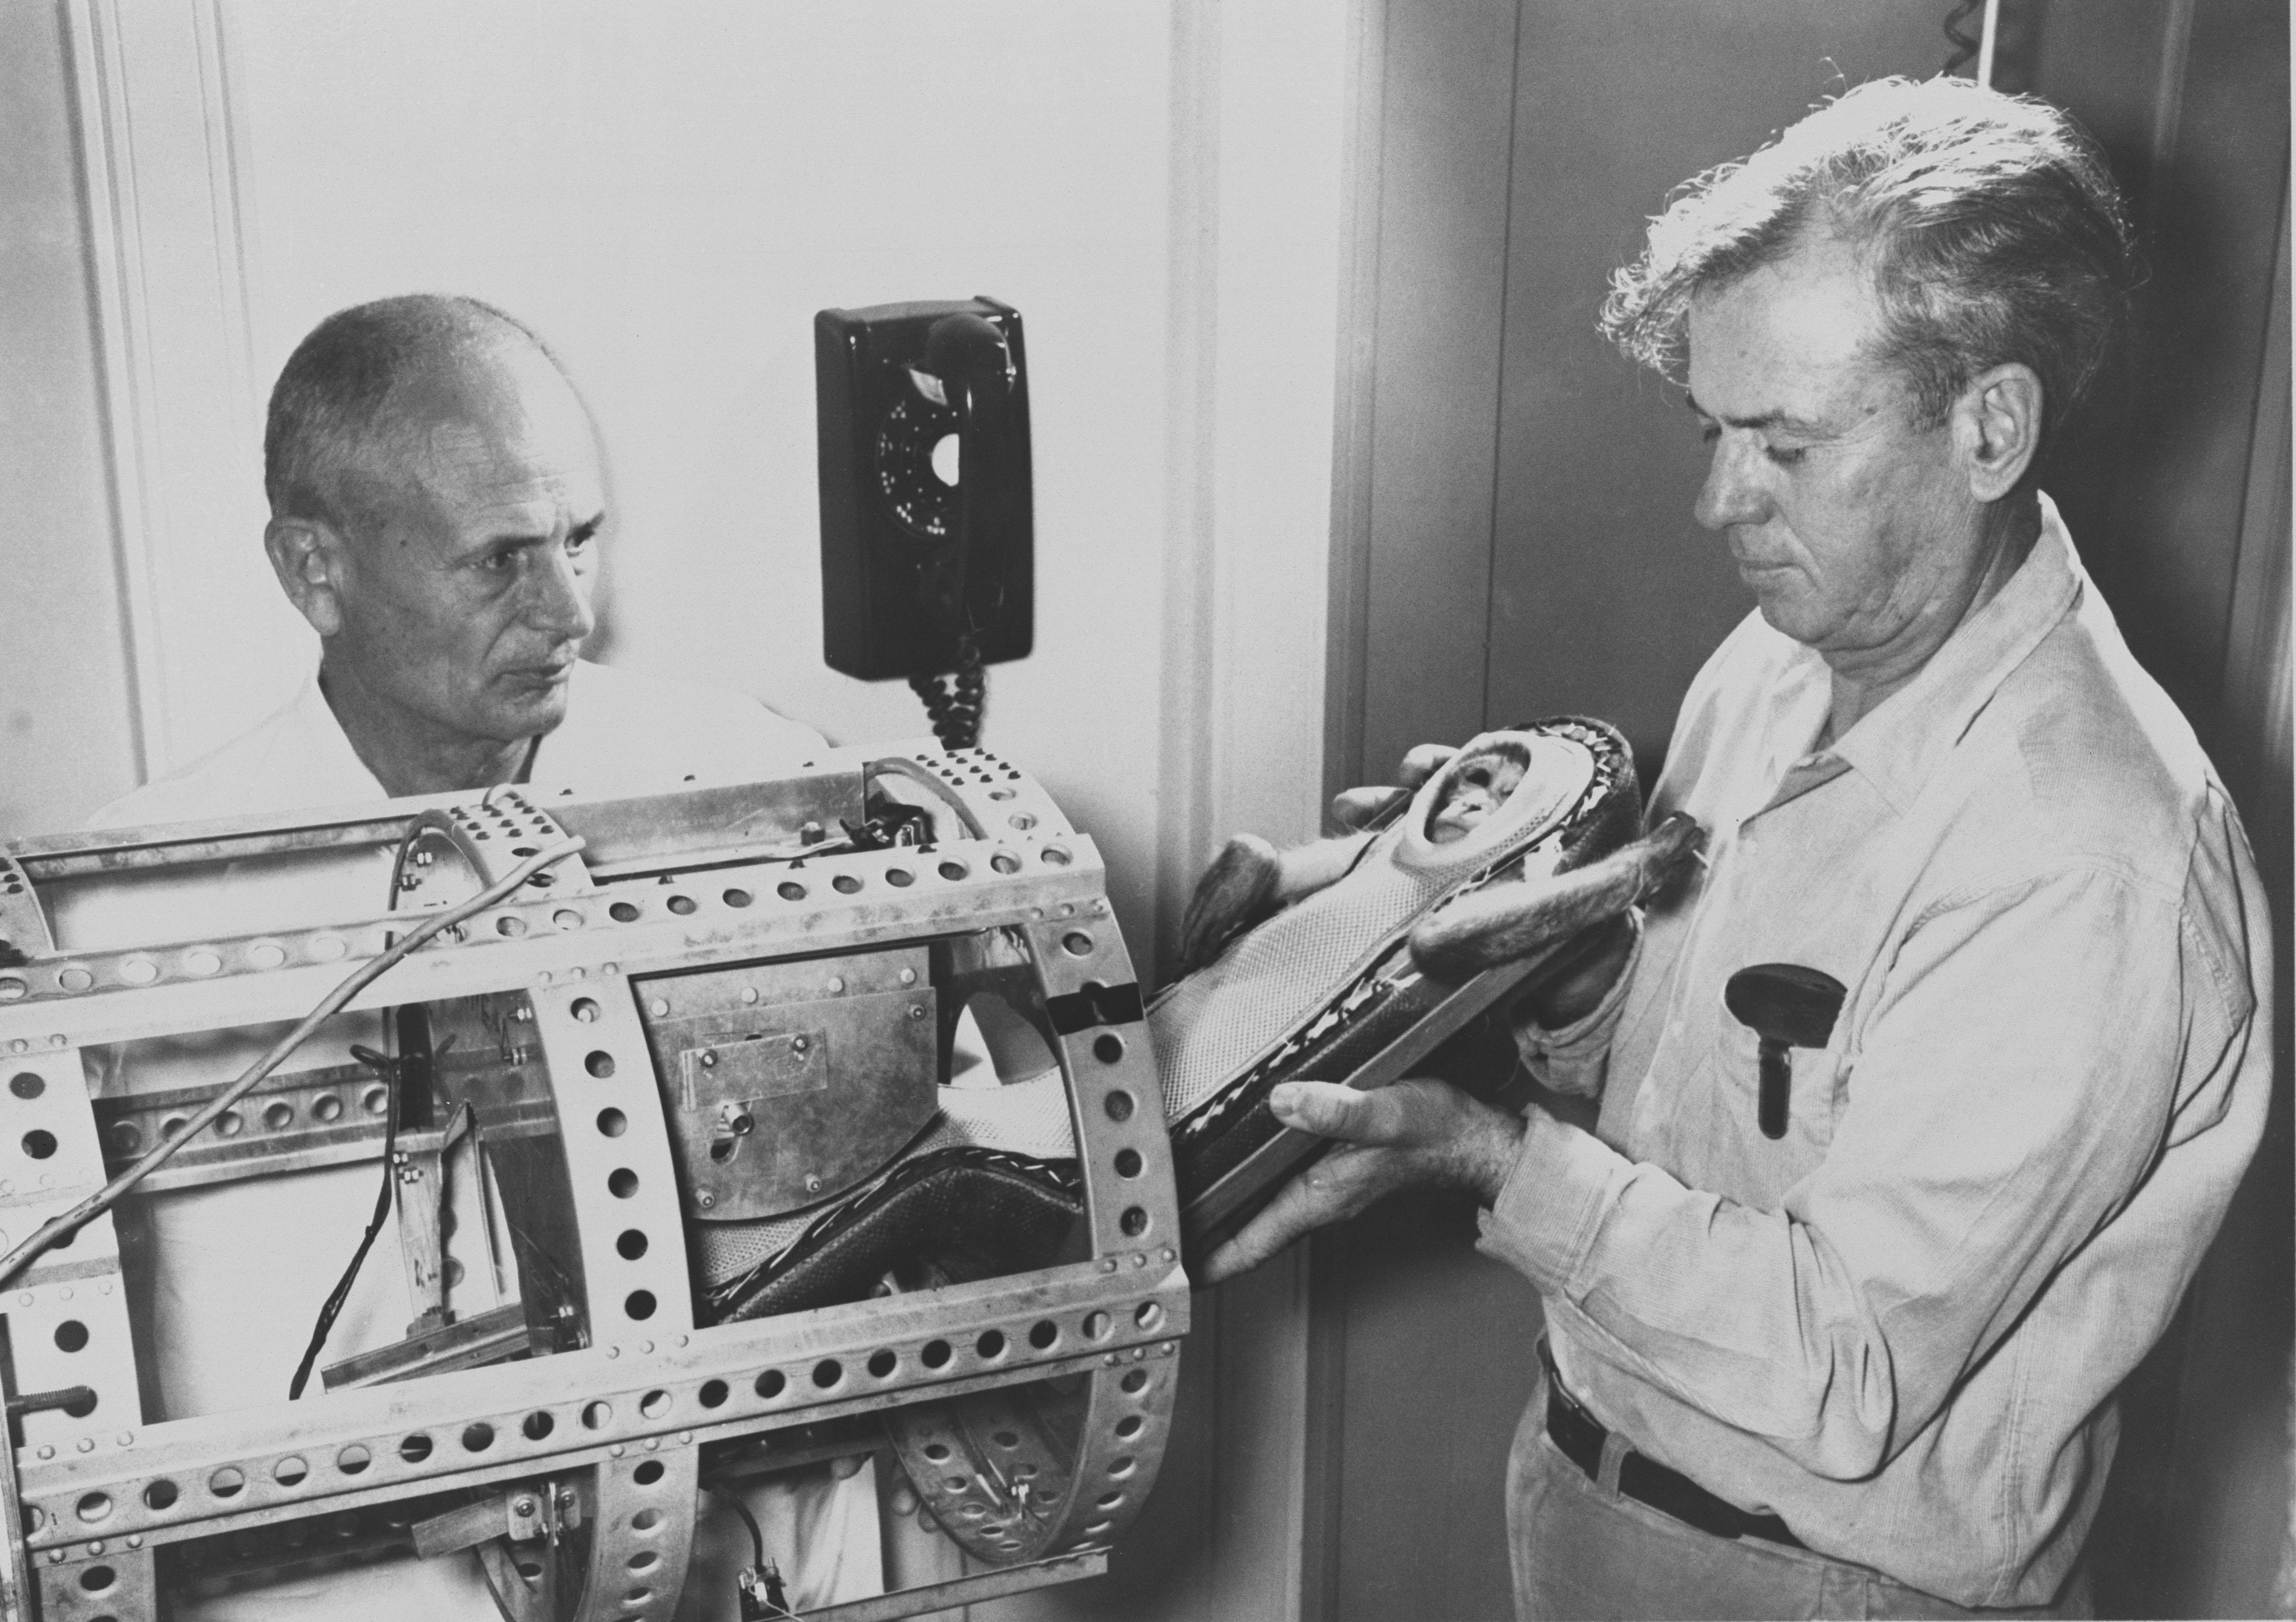 Rhesus Monkey Miss Sam being placed in a container for the Little Joe 1B, a launch escape system test of the Mercury spacecraft conducted on January 21st 1960.jpg